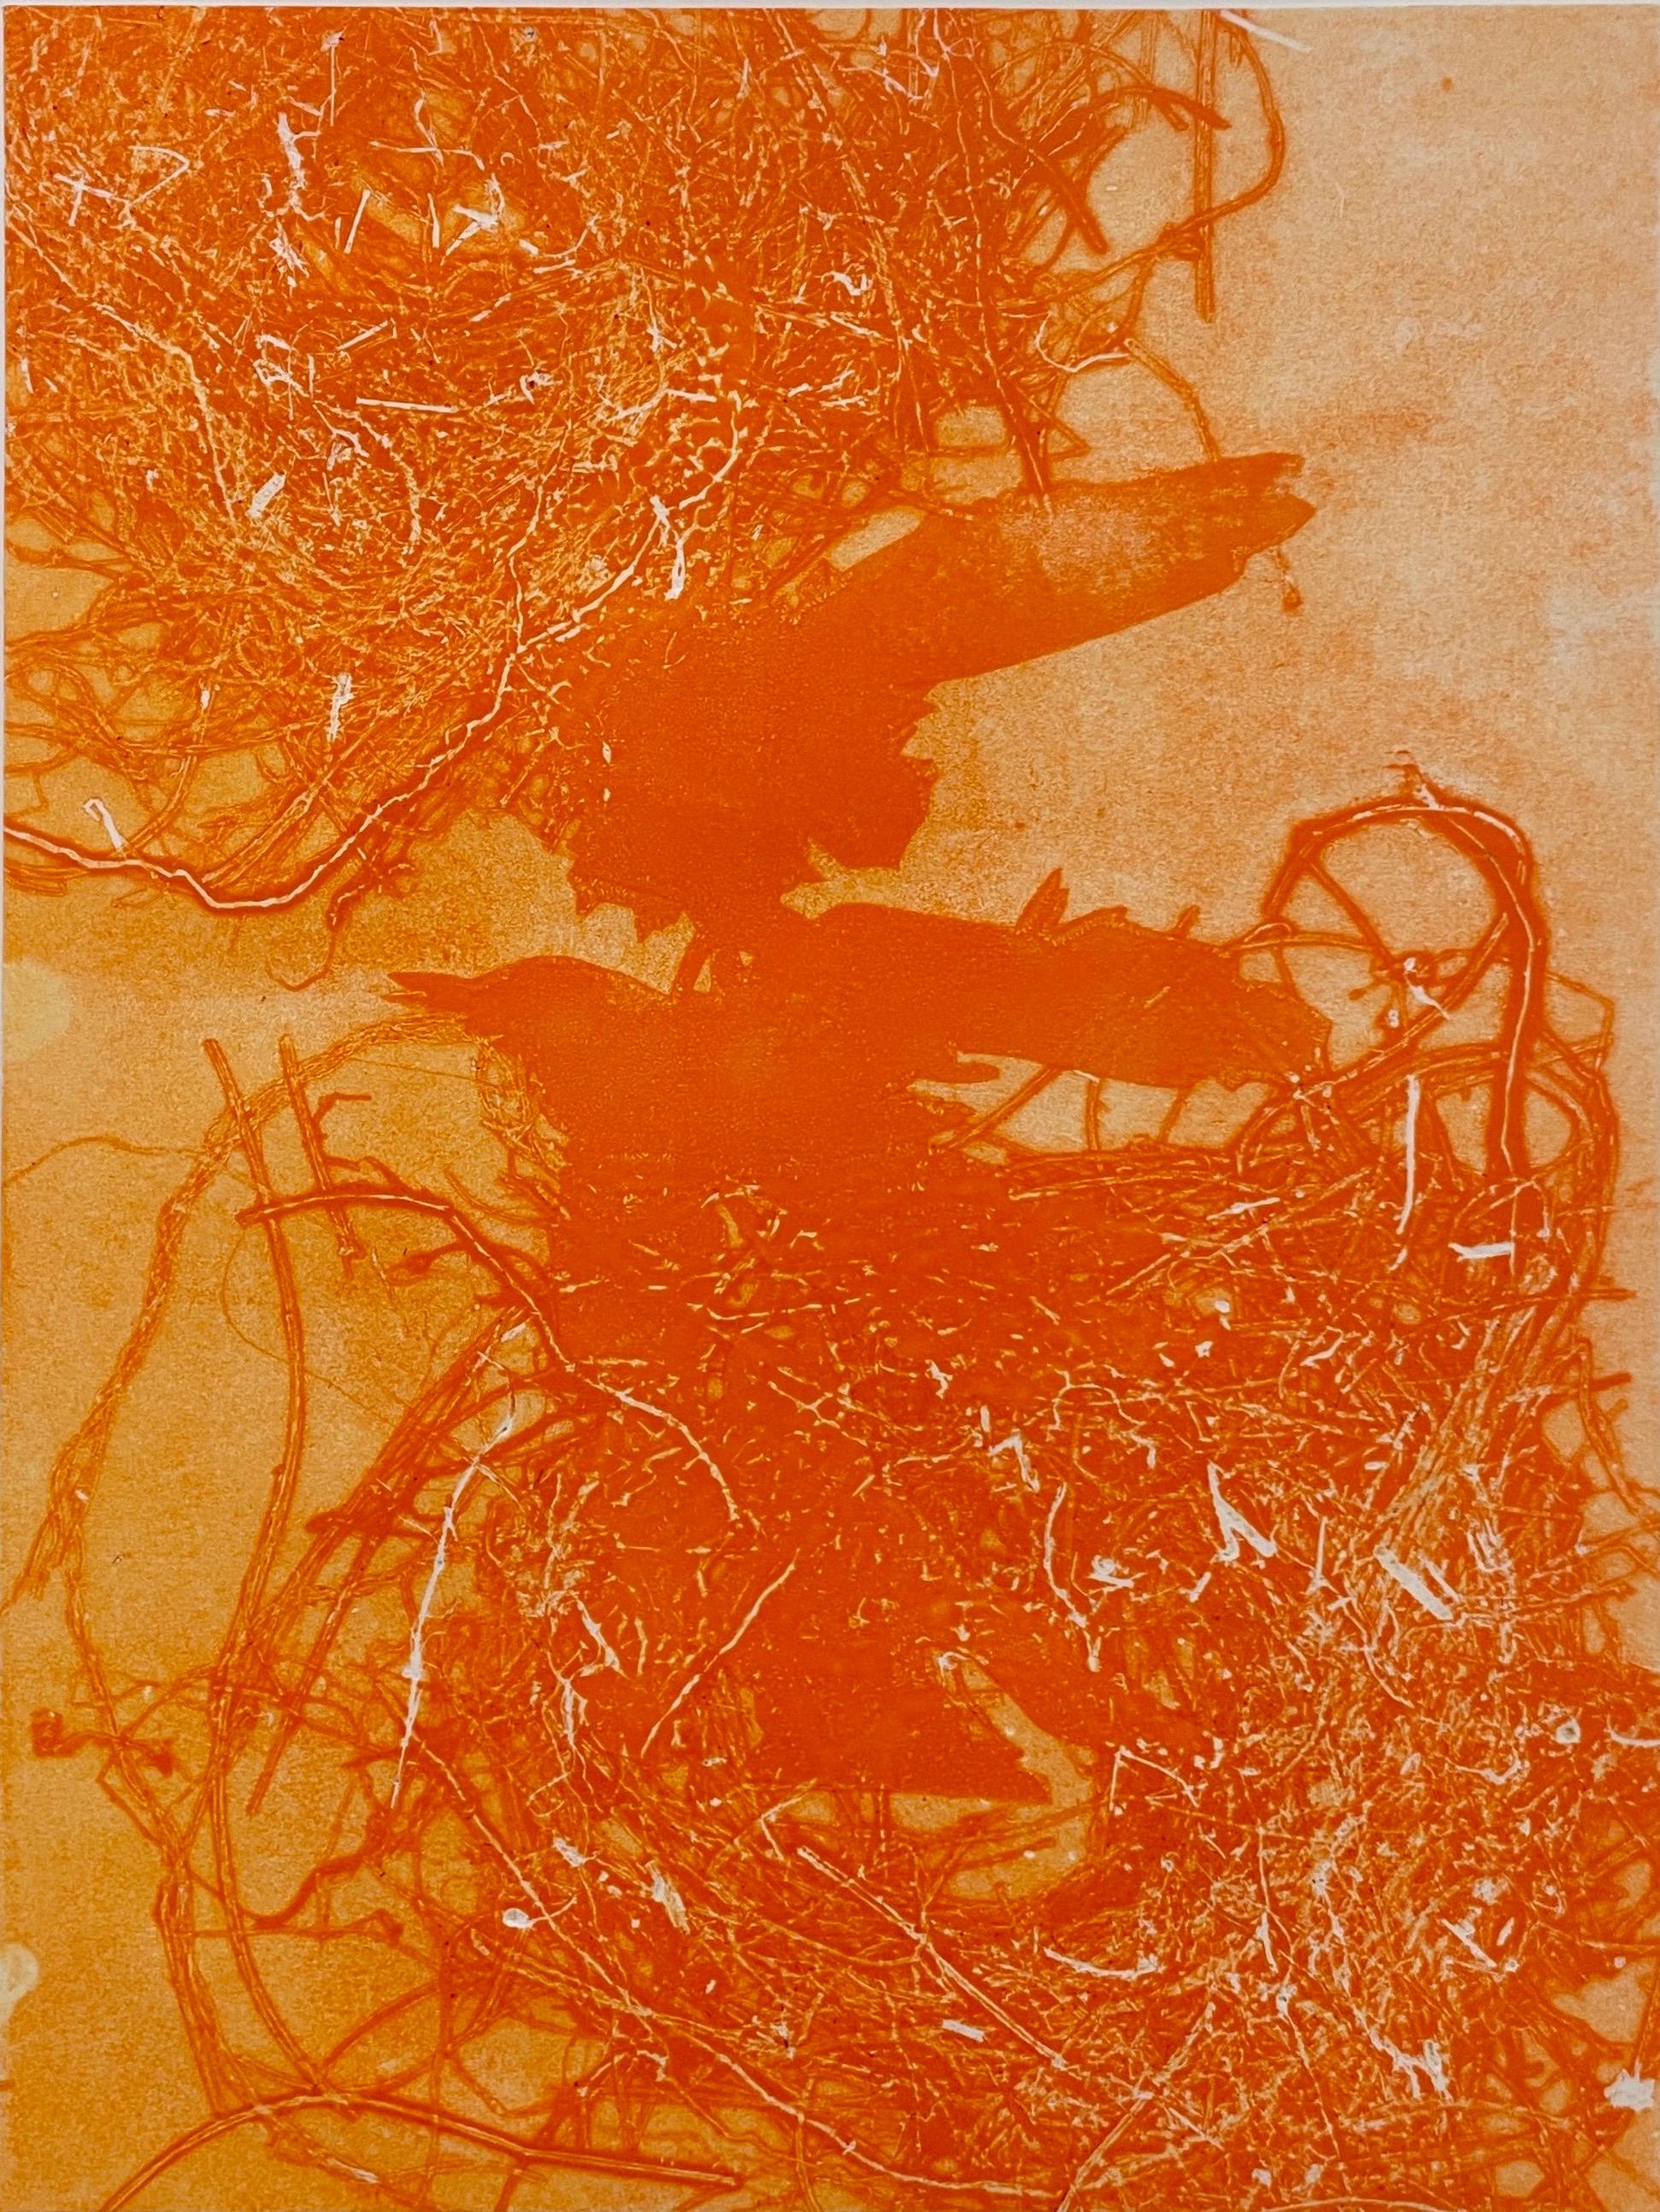 Flirtation: one-of-a kind monoprint of abstract bird in nest in orange